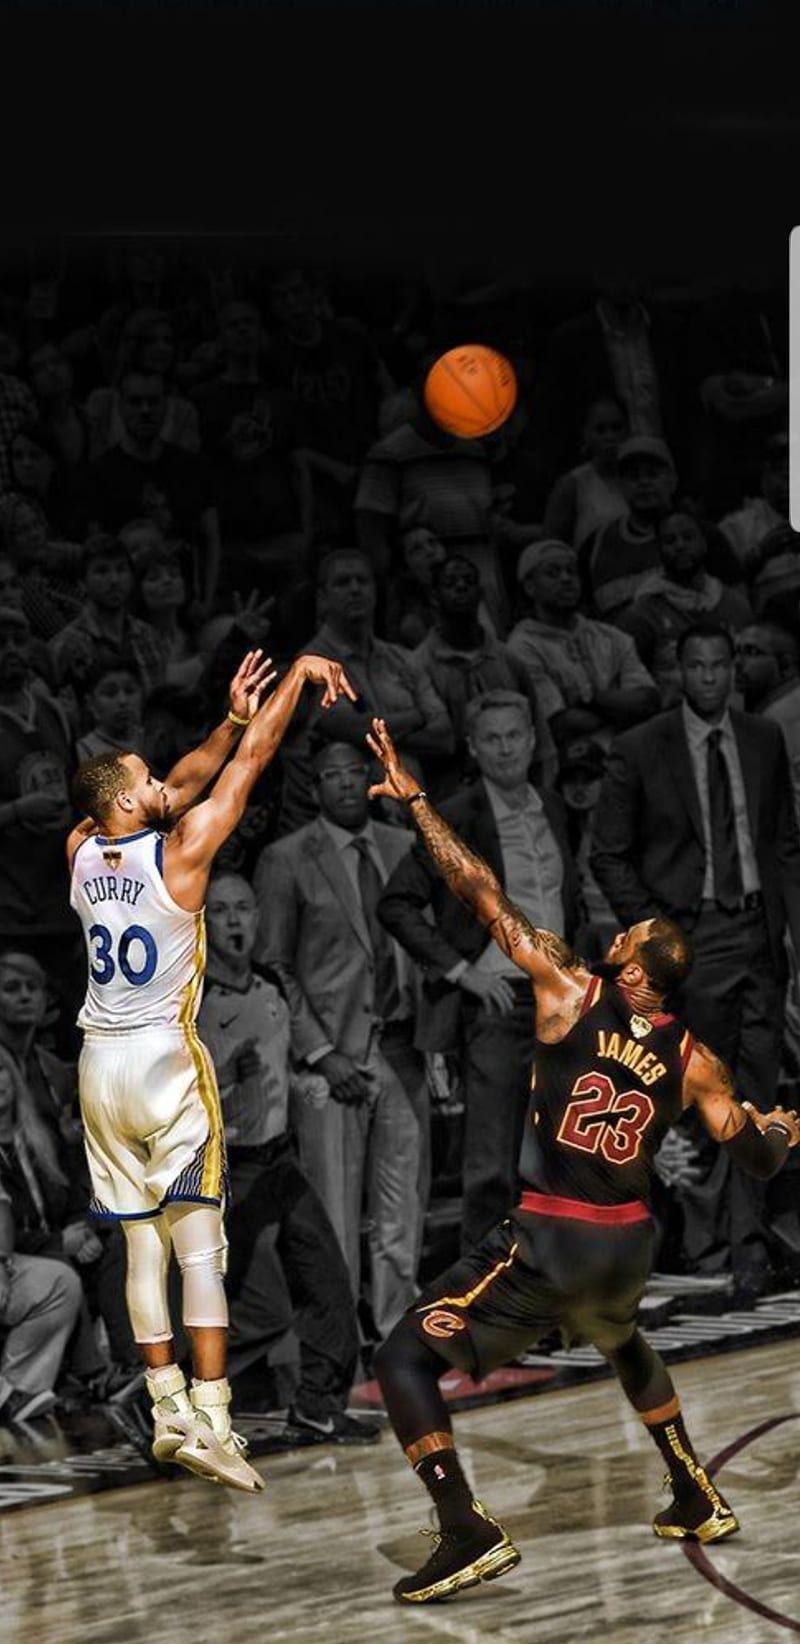 Stephen Curry and LeBron James iPhone Wallpaper with high-resolution 1080x1920 pixel. You can use this wallpaper for your iPhone 5, 6, 7, 8, X, XS, XR backgrounds, Mobile Screensaver, or iPad Lock Screen - Lebron James